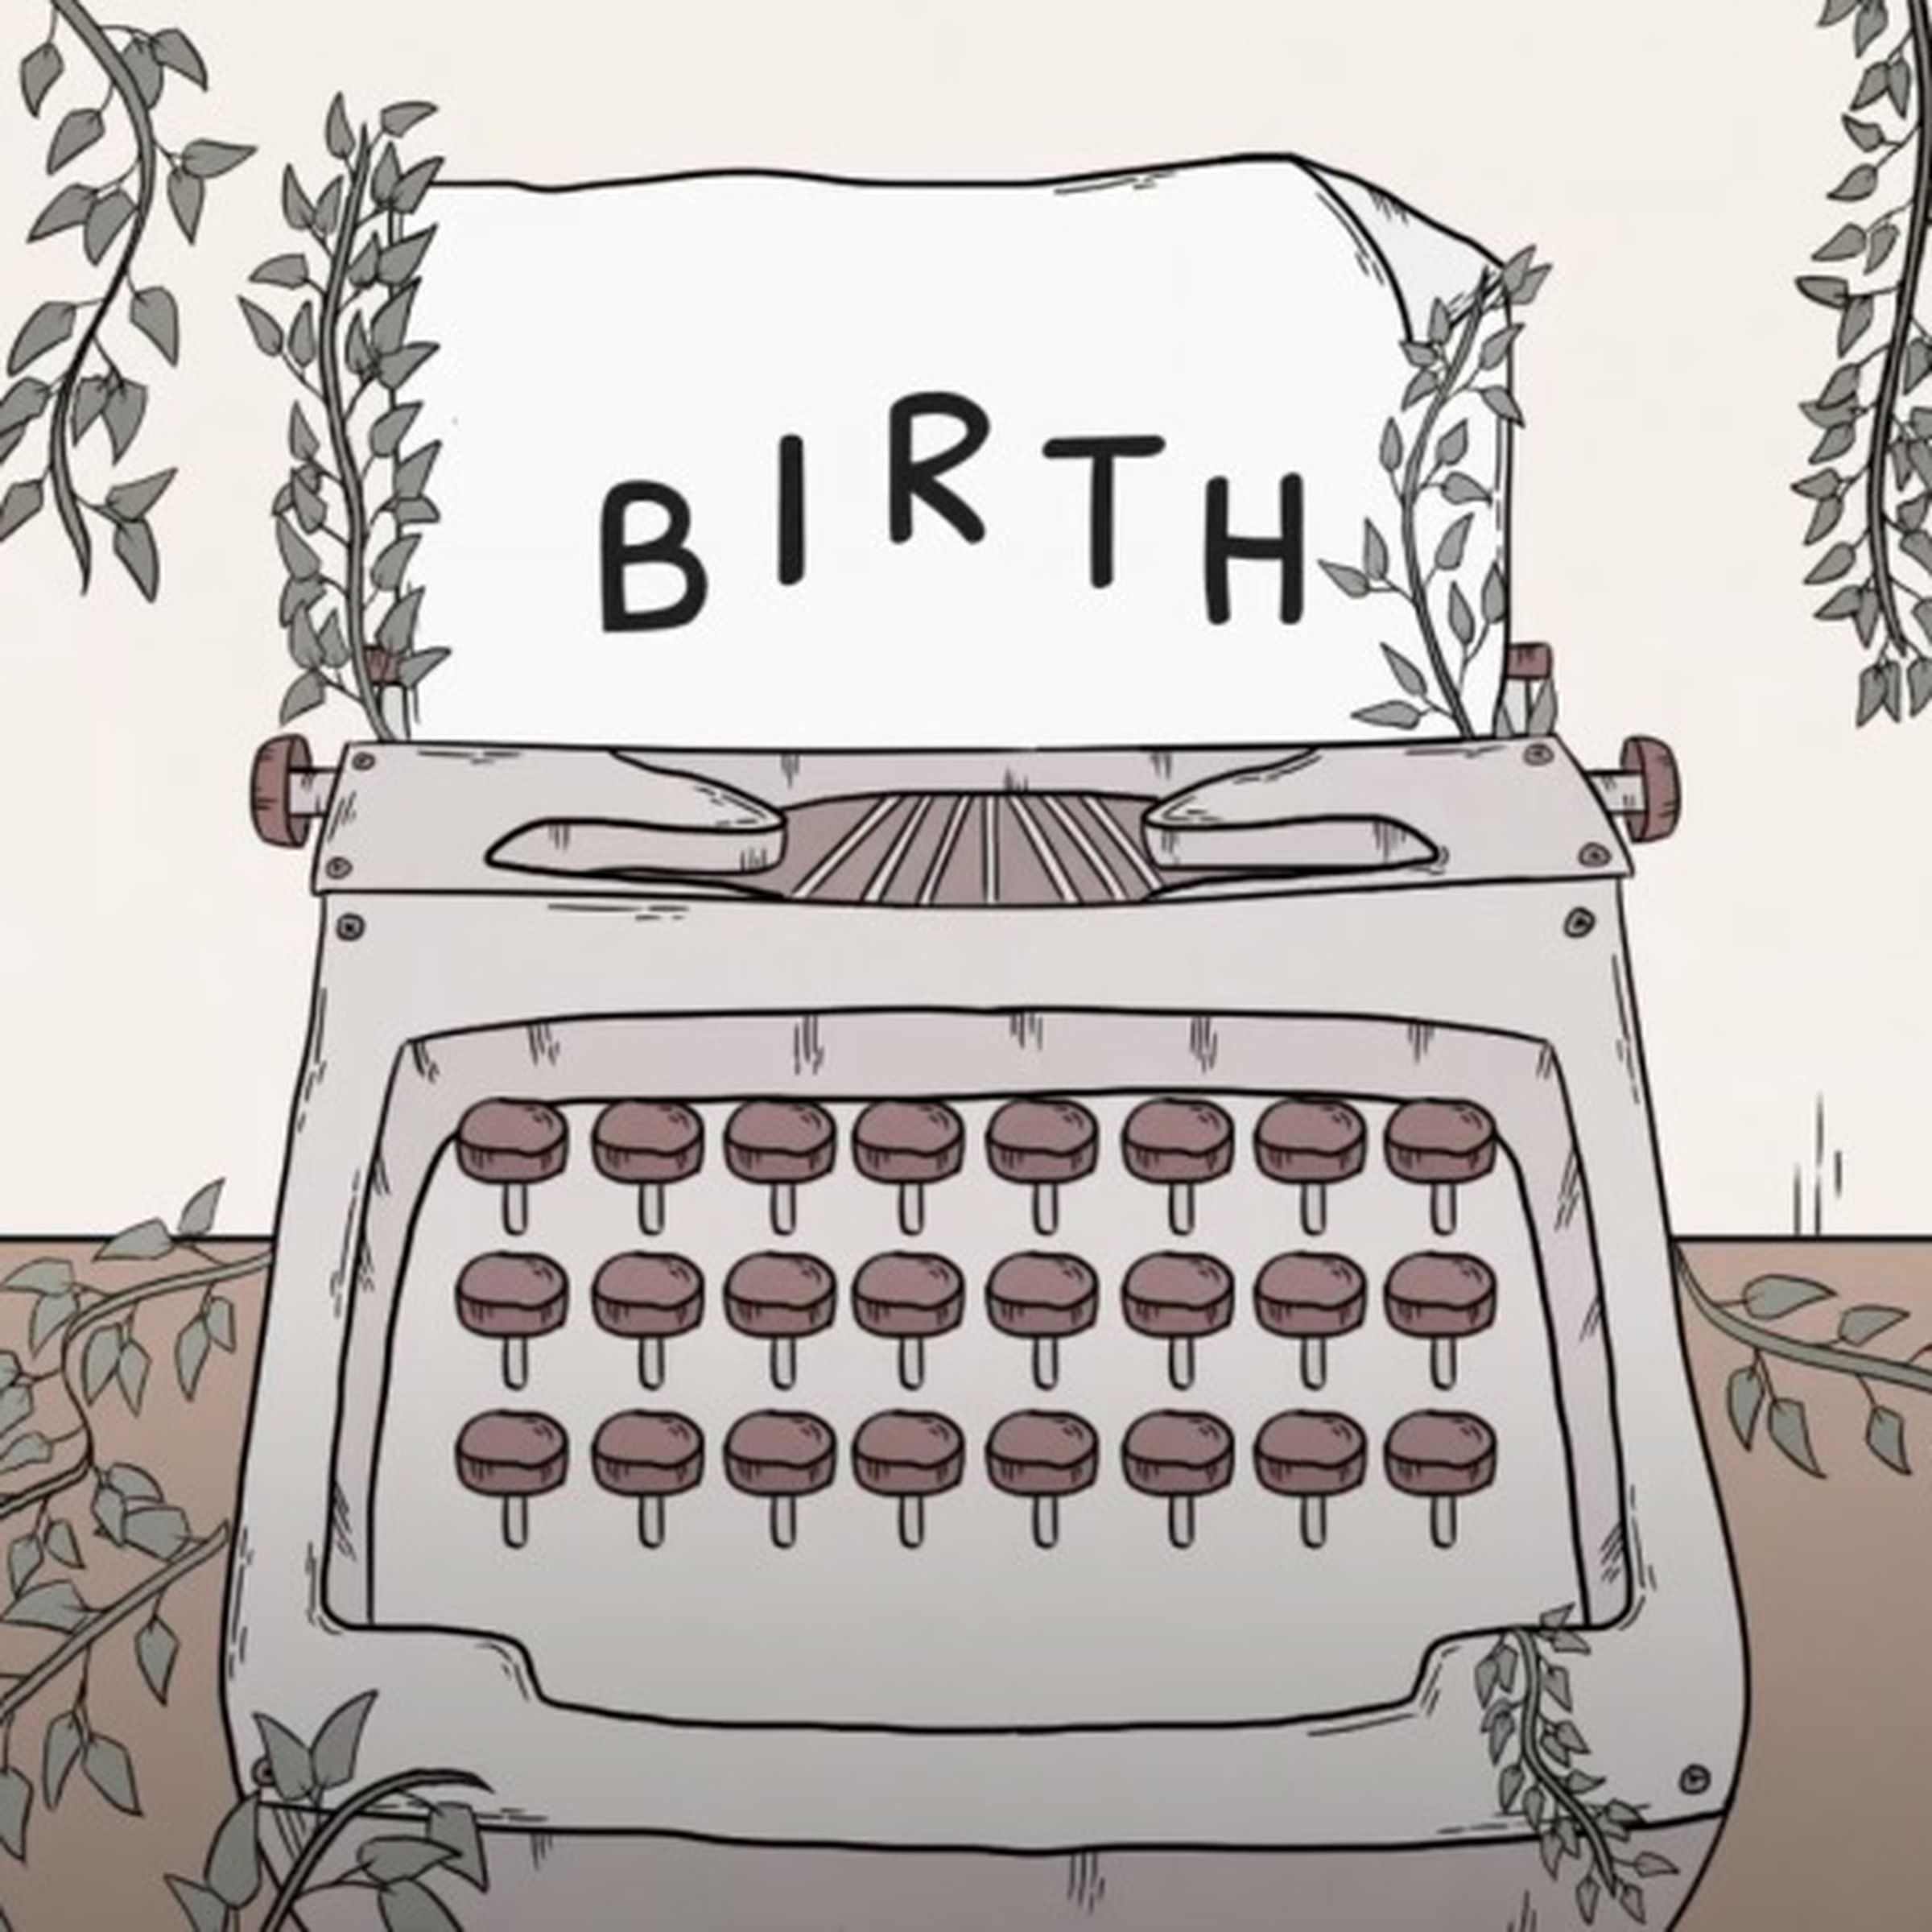 An illustration of a typewriter covered in vines, the word “BIRTH” appears on a page inserted in the typewriter.